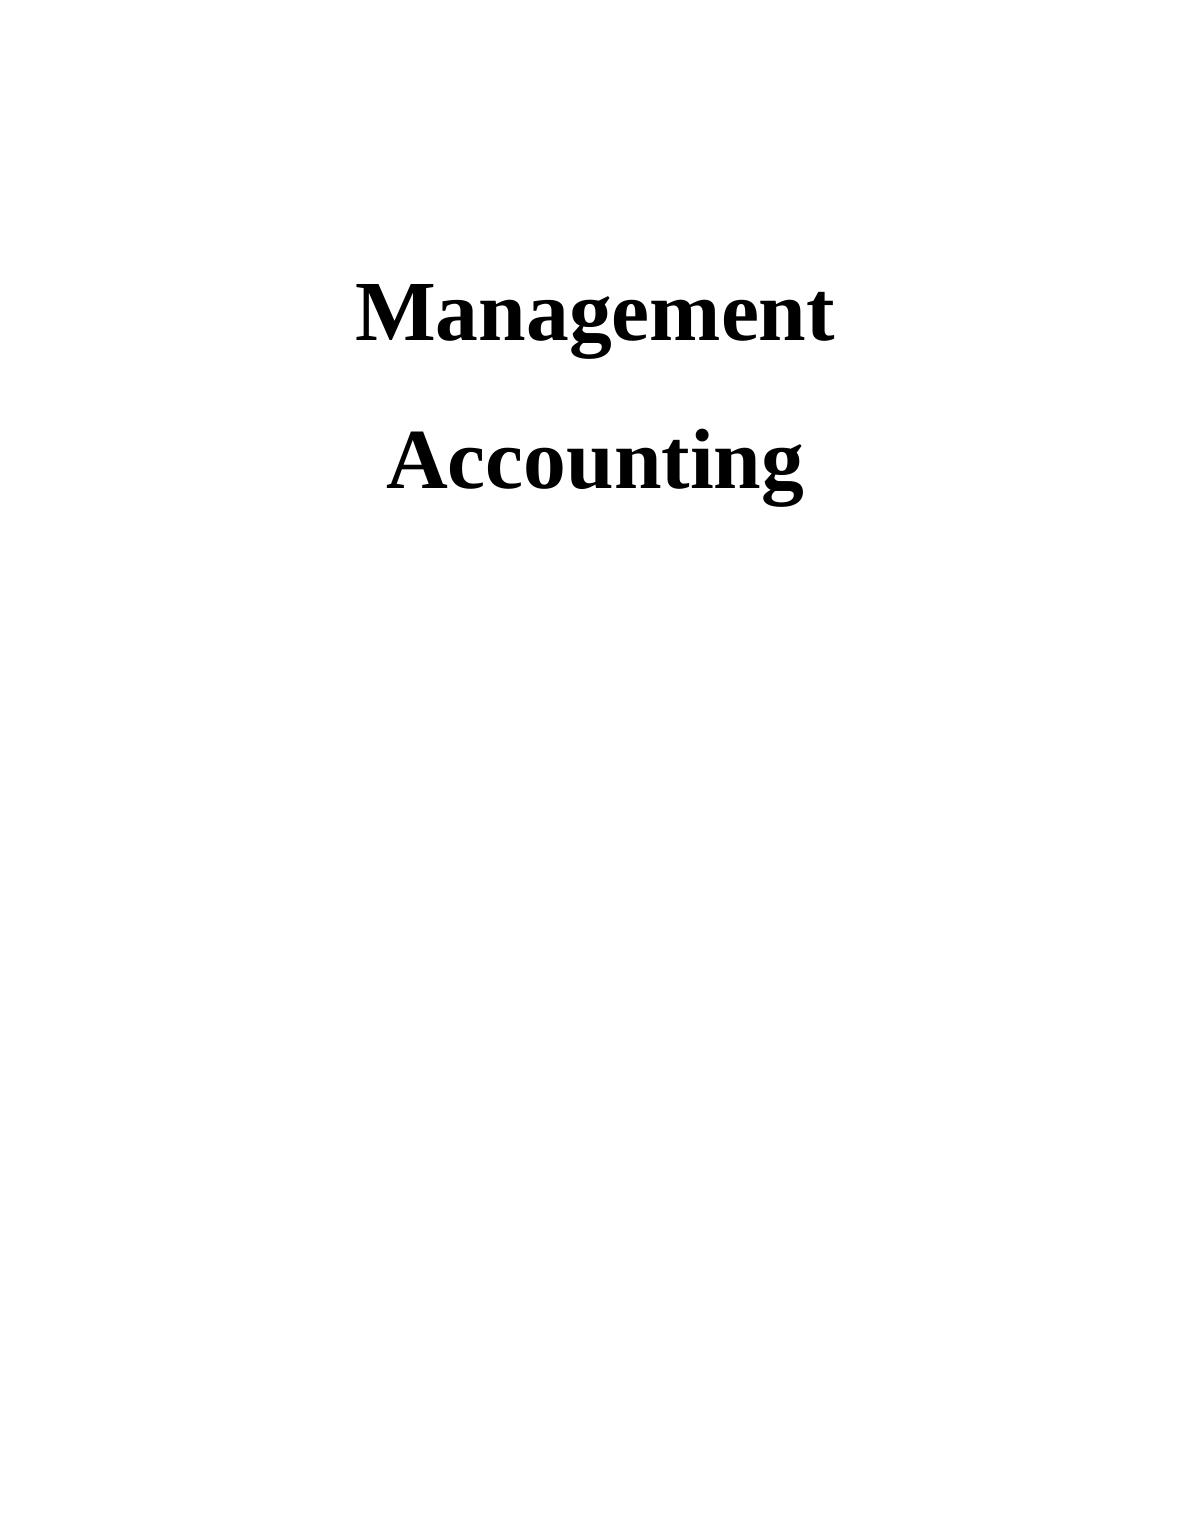 Management Accounting INTRODUCTION 1 TASK 11 P1 Management Accounting System and Its Application in Organisational Context_1